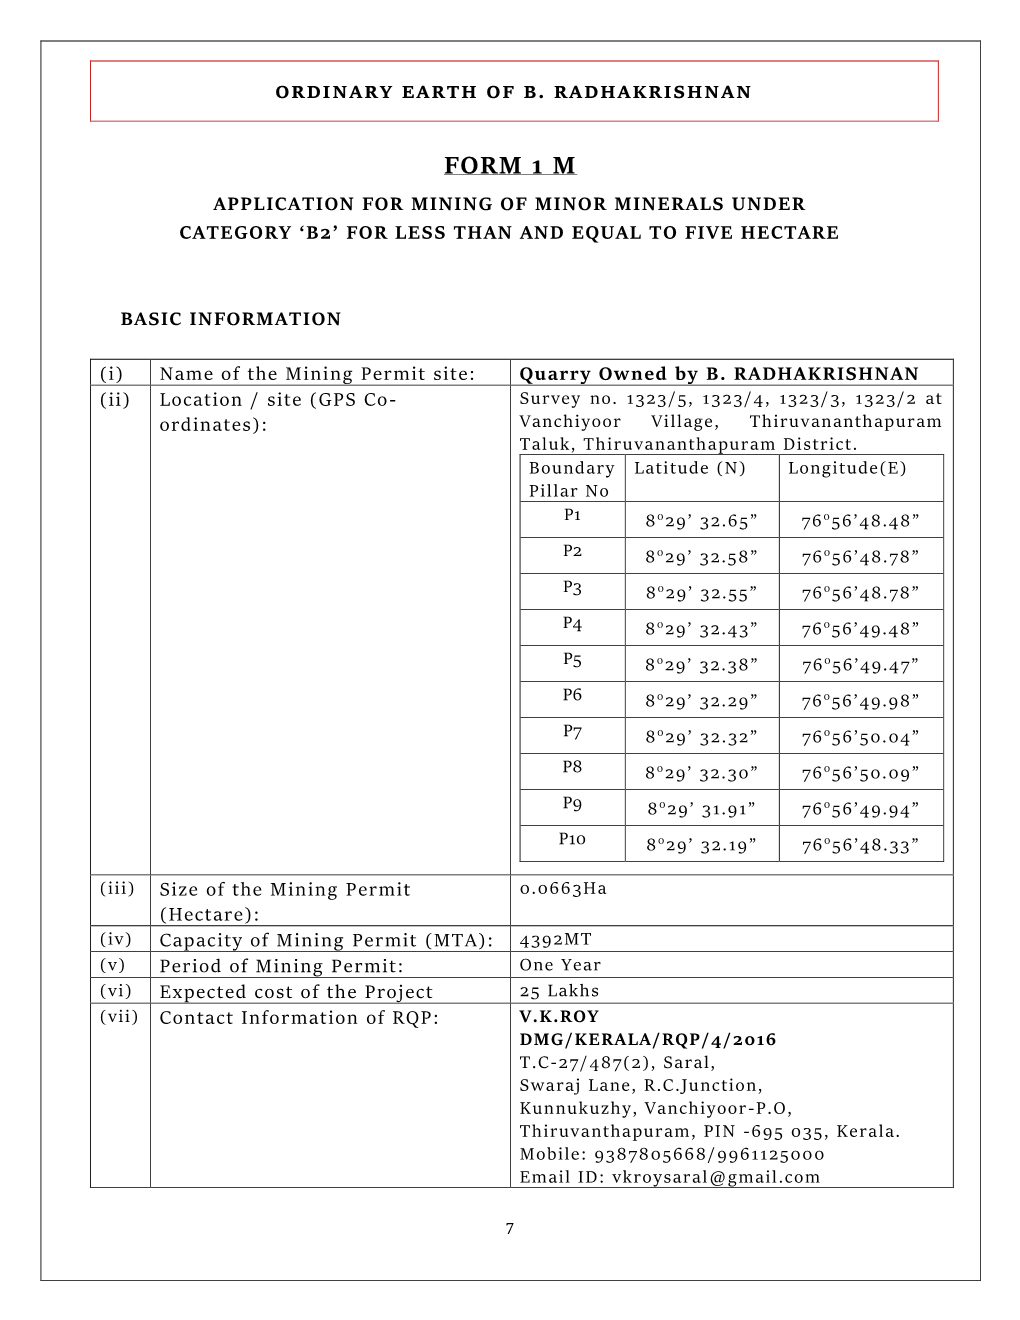 Form 1 M Application for Mining of Minor Minerals Under Category ‘B2’ for Less Than and Equal to Five Hectare